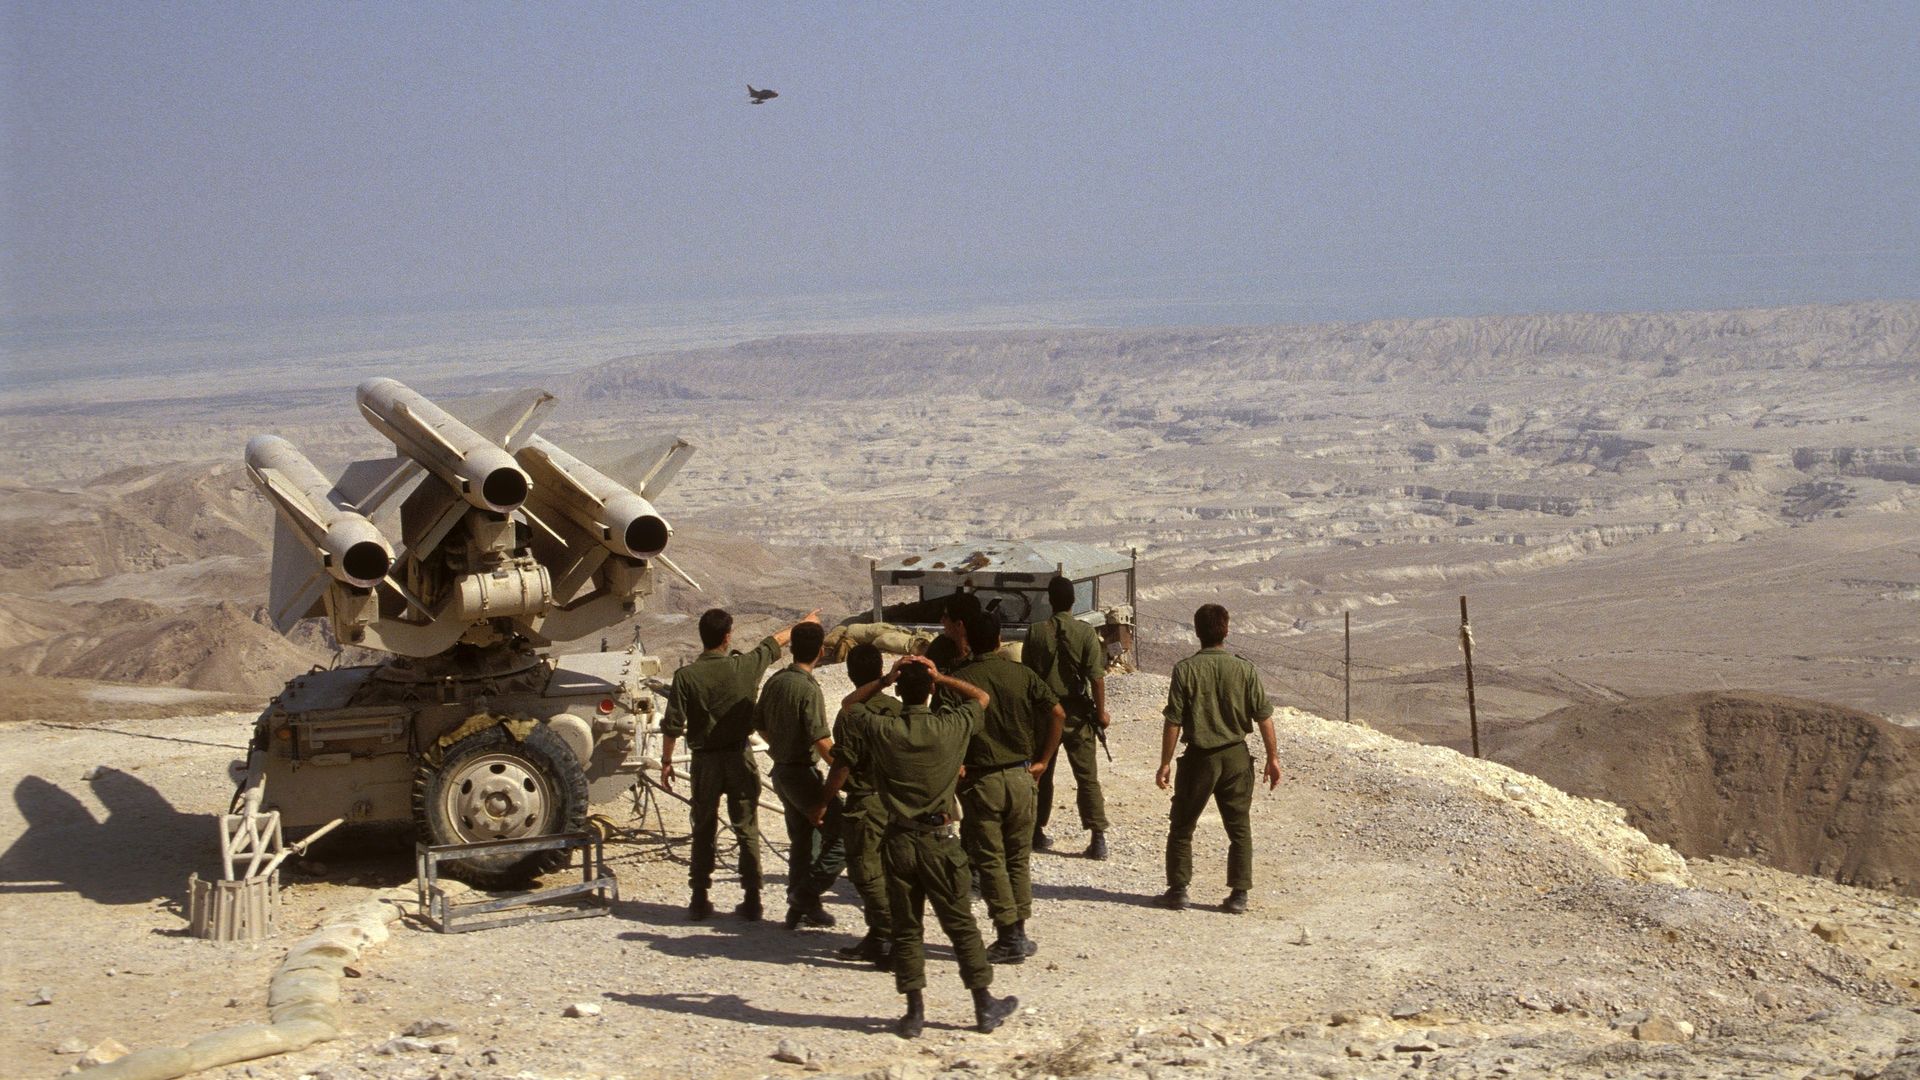 Israeli soliders stand next to a HAWK system near Jericho in 1993. Photo: Esaias Baitel/Gamma-Rapho via Getty Images